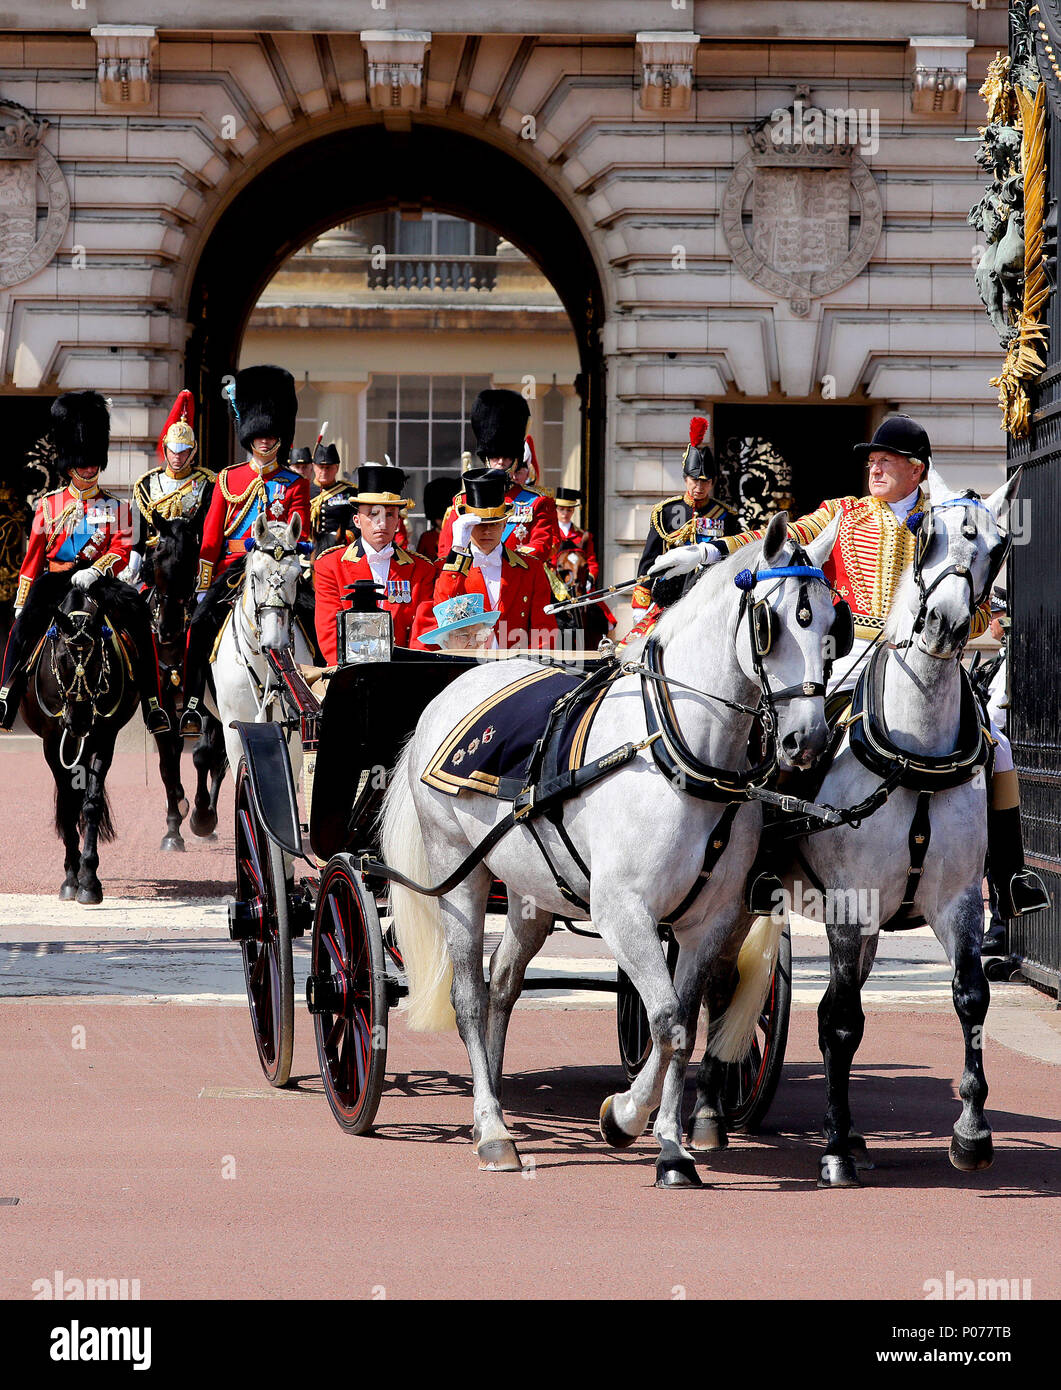 London, UK. 09th June, 2018. Queen Elizabeth II leave at Buckingham Palace in London, on June 09, 2018, to attend Trooping the colour, the Queens birthday parade Photo : Albert Nieboer/Netherlands OUT/Point de Vue OUT - NO WIRE SERVICE - Credit: Albert Nieboer/RoyalPress/dpa/Alamy Live News Stock Photo